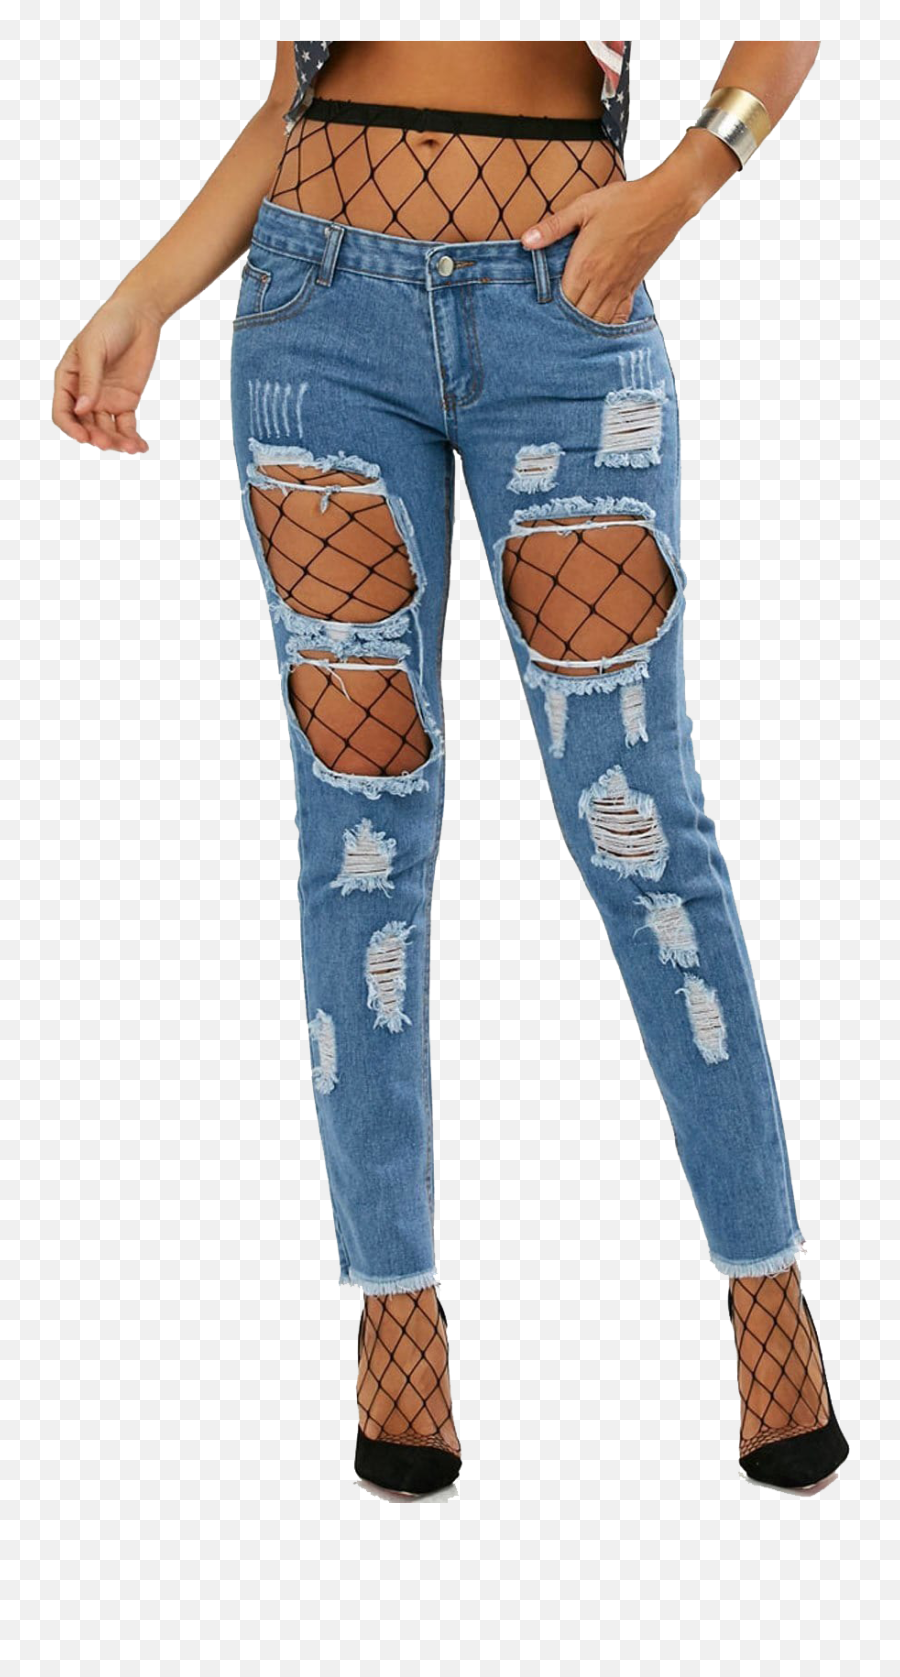 Download Free Png Ripped Jean Image - Dlpngcom Ripped Jeans With Fishnets,Ripped Jeans Png